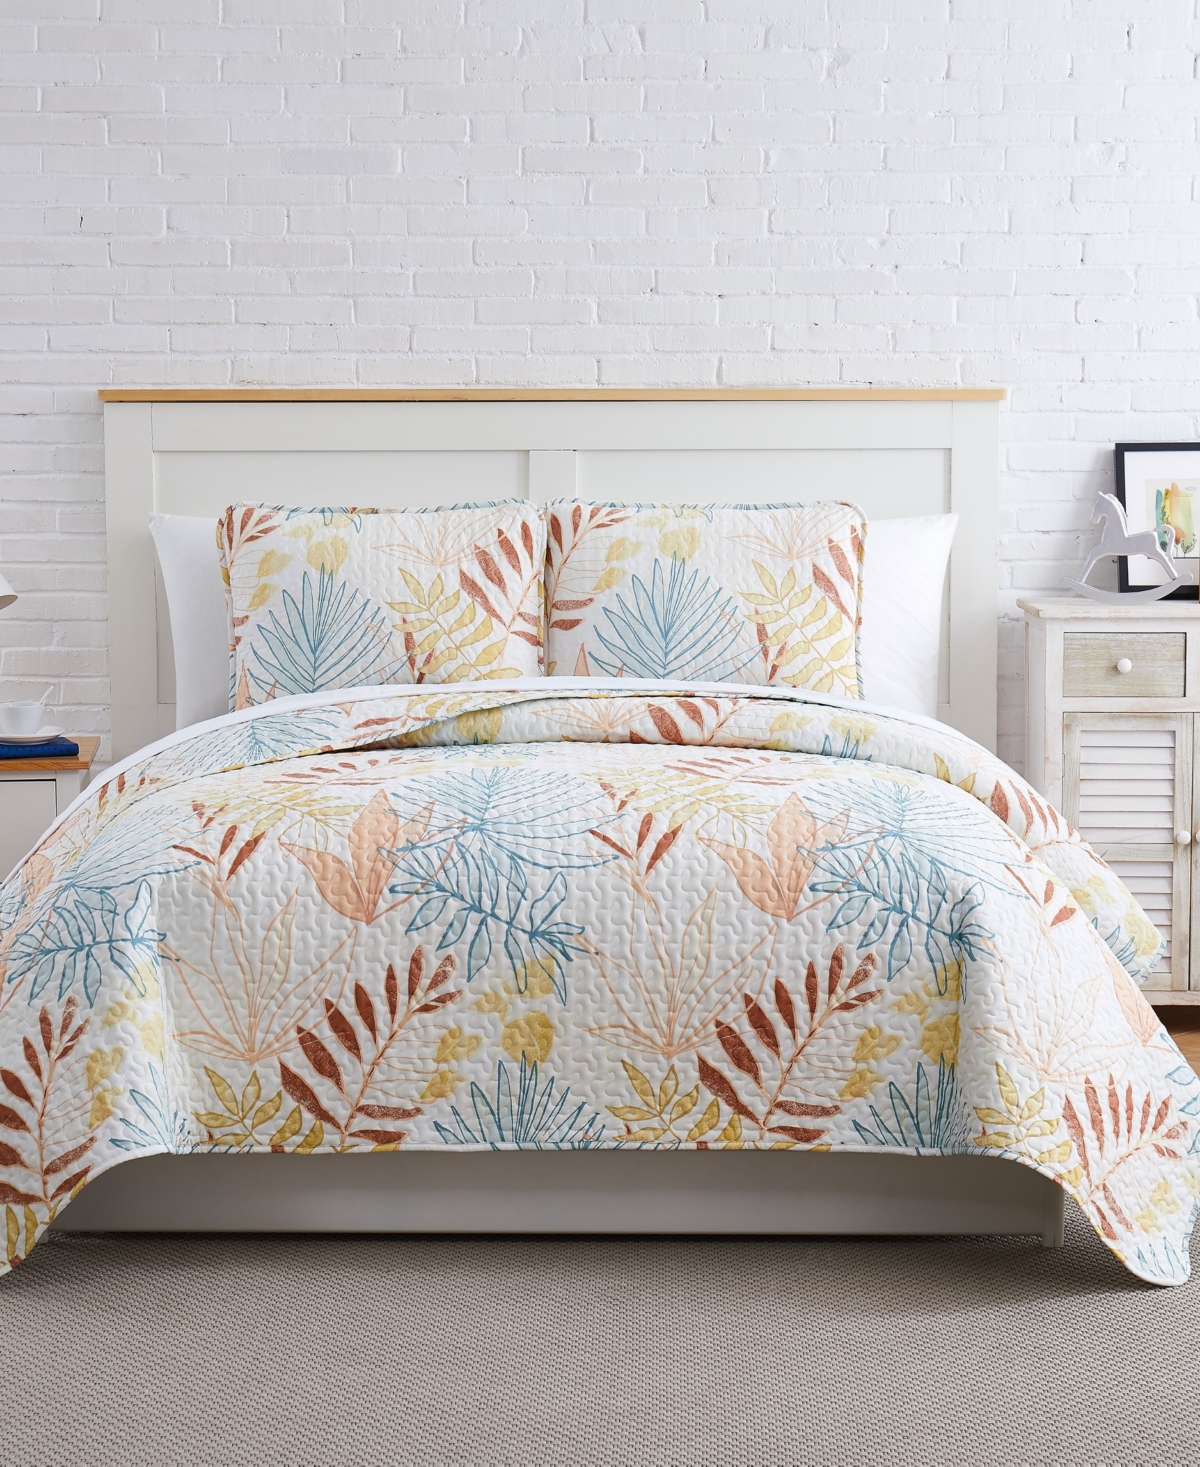 Southshore Fine Linens Tropic Leaf Quilt And Sham 3 Piece Set, King Or California King In Multi